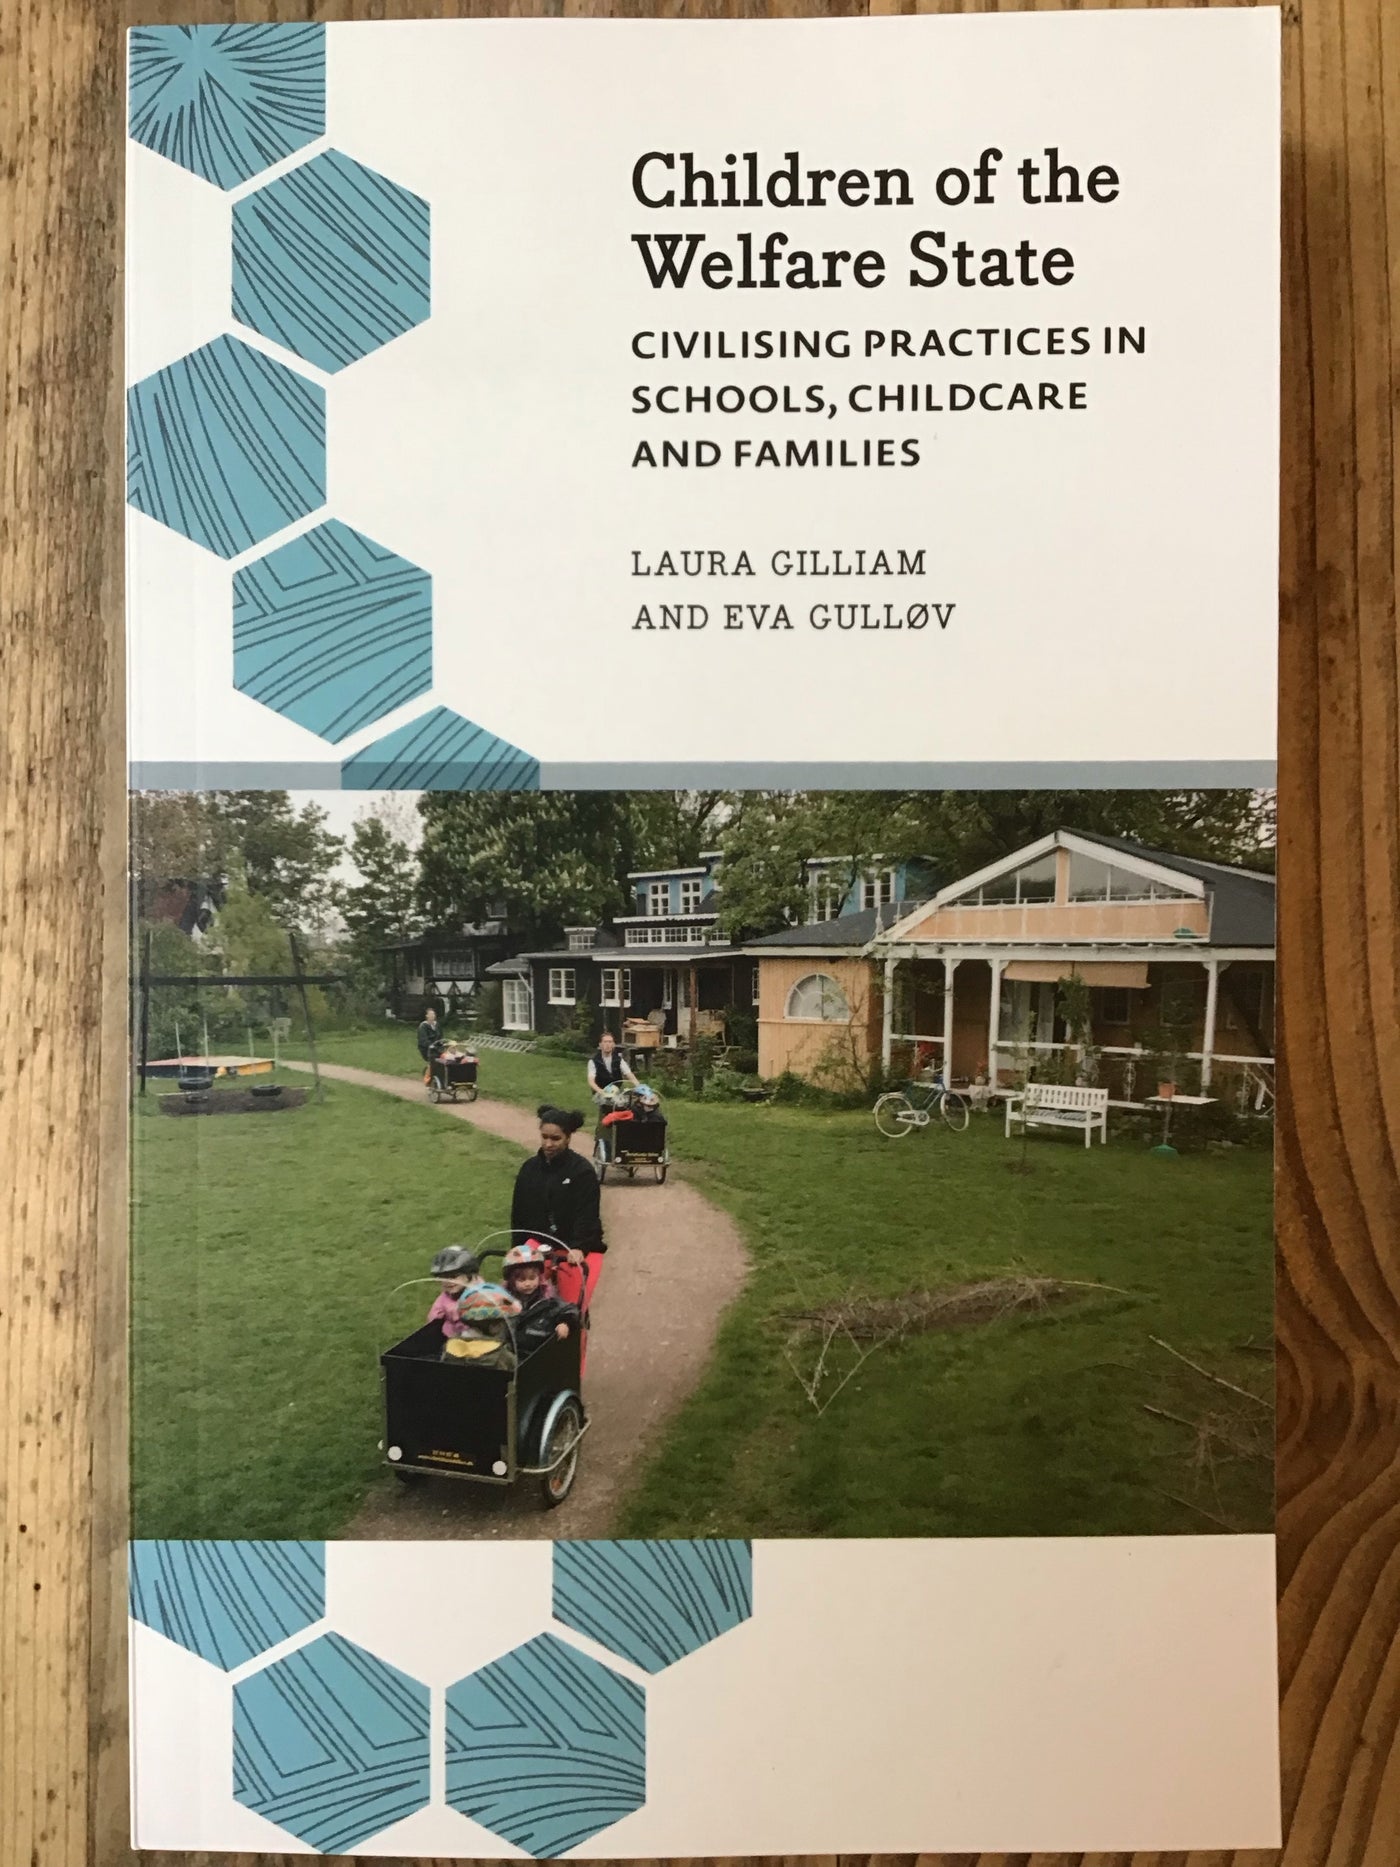 Children of the Welfare State: Civilising Practices in Schools, Childcare and Families